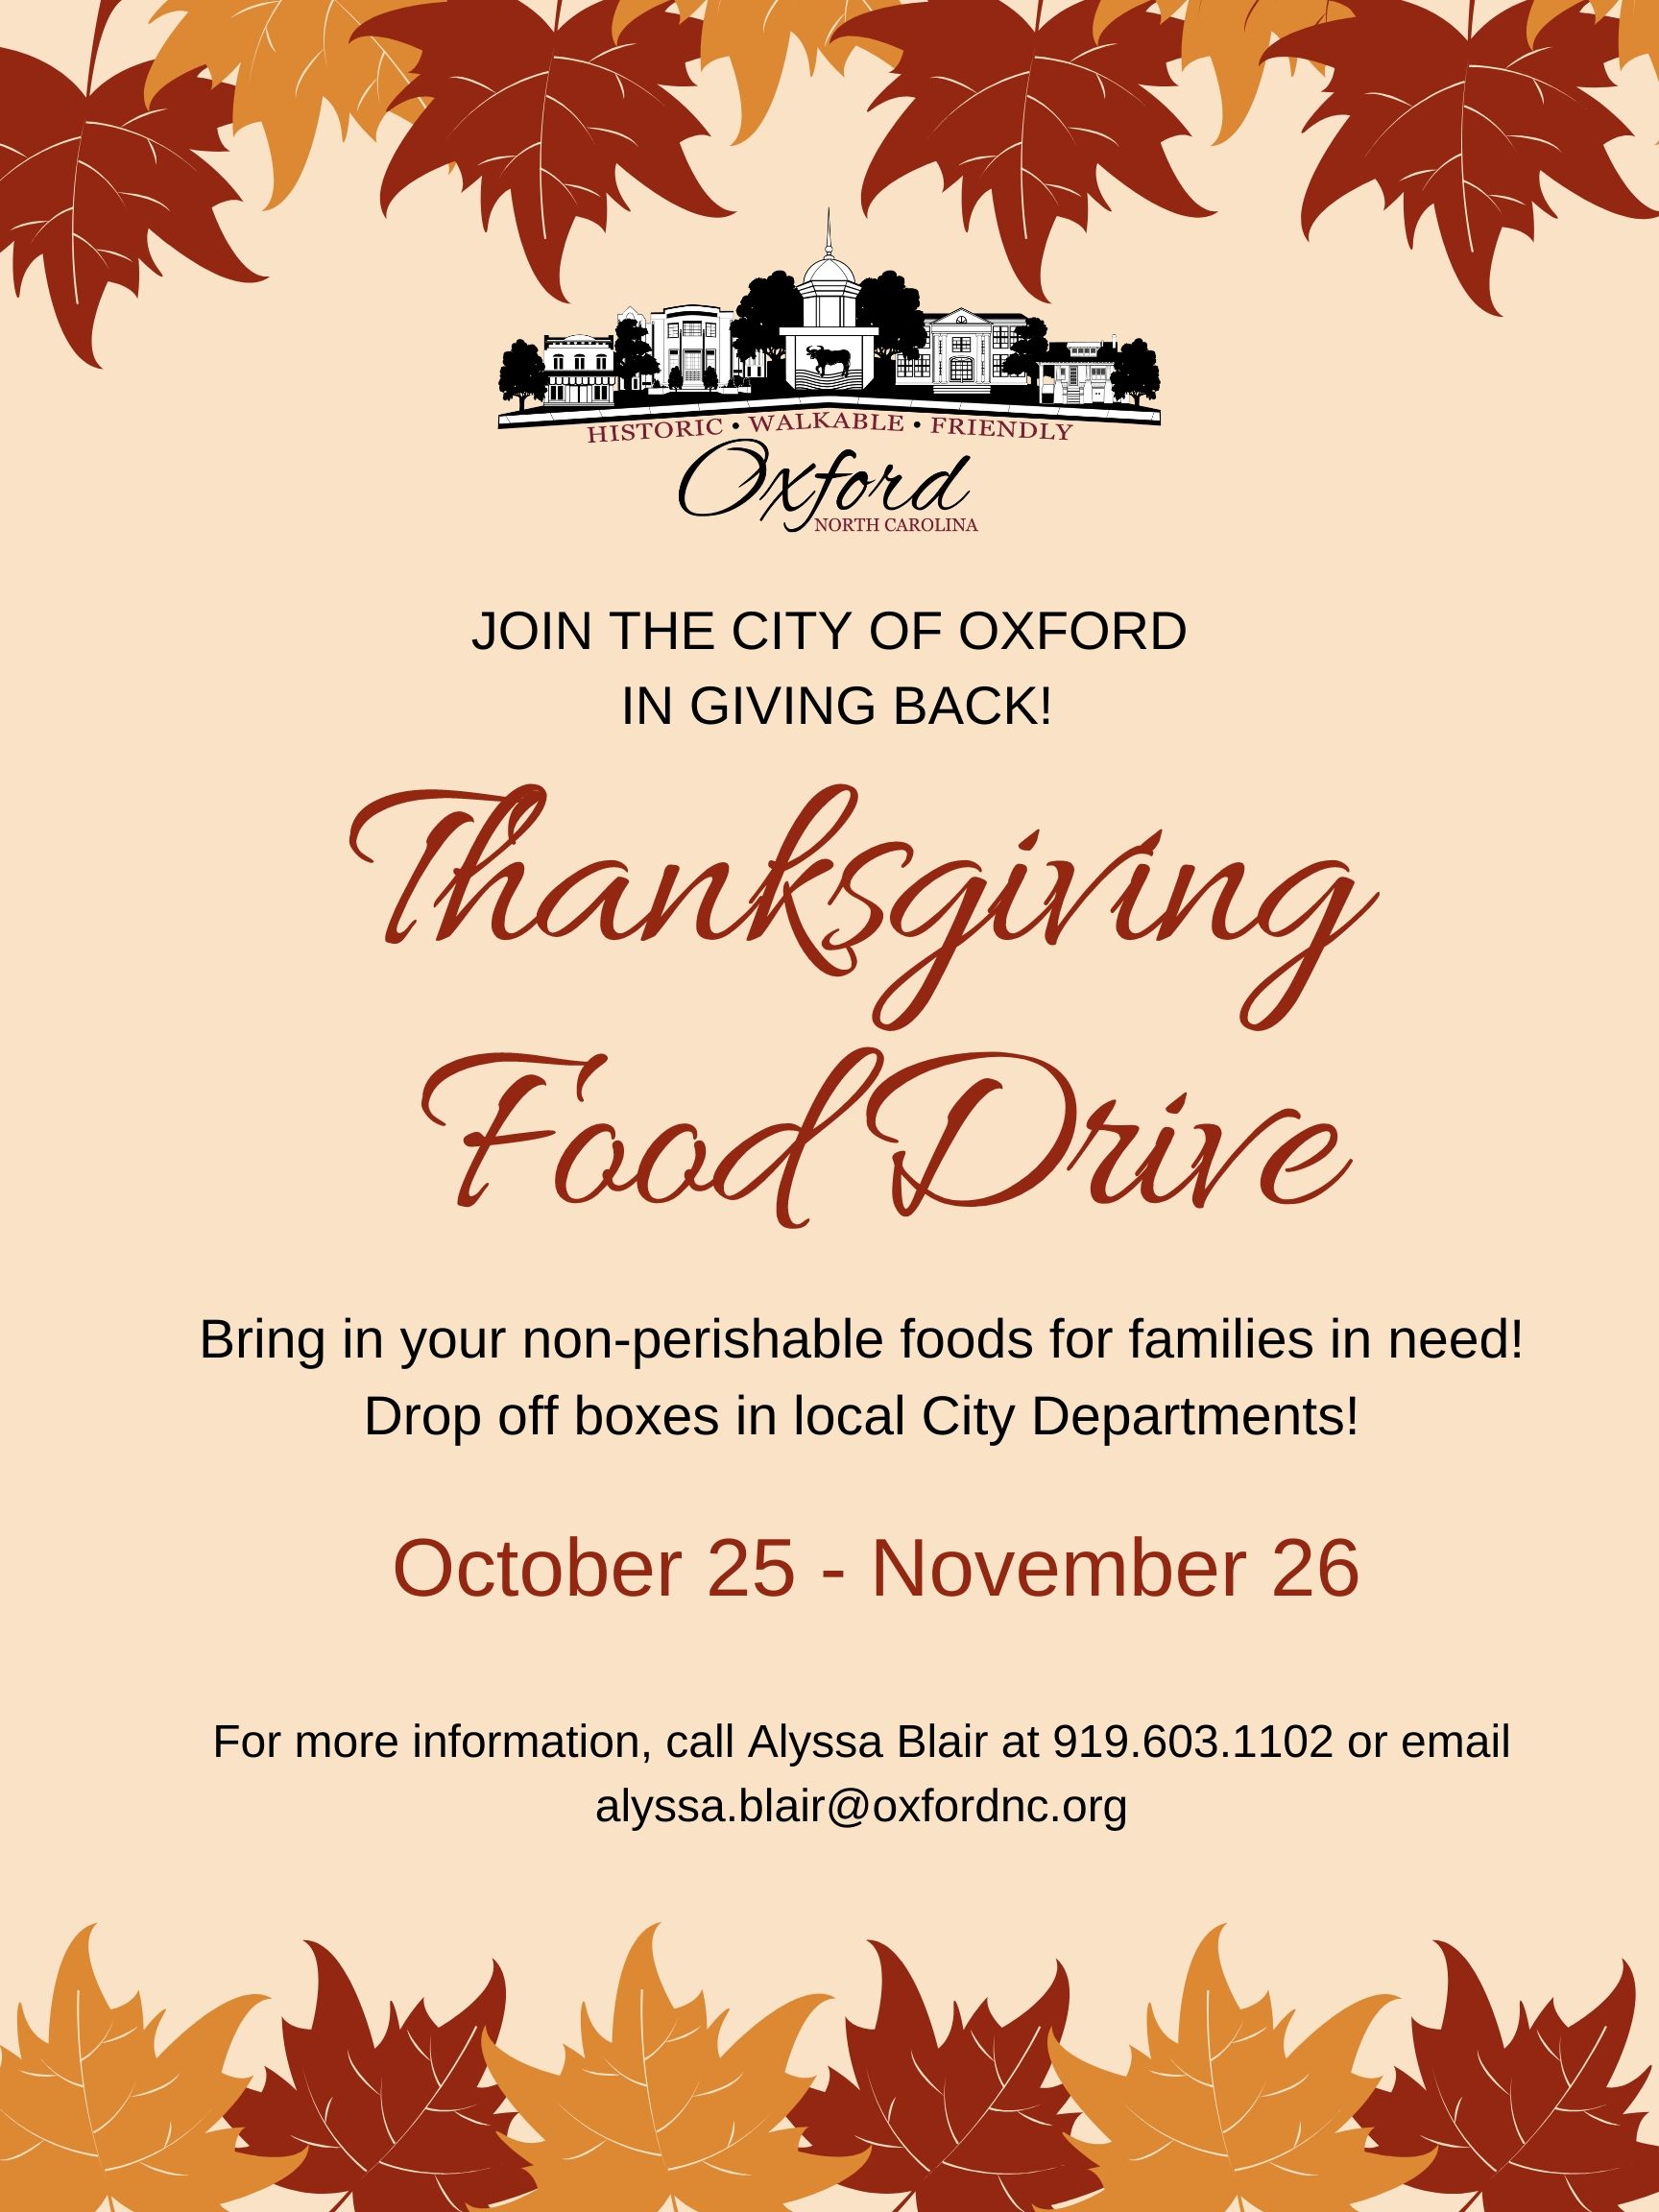 JOIN THE CITY OF OXFORD IN GIVING BACK!